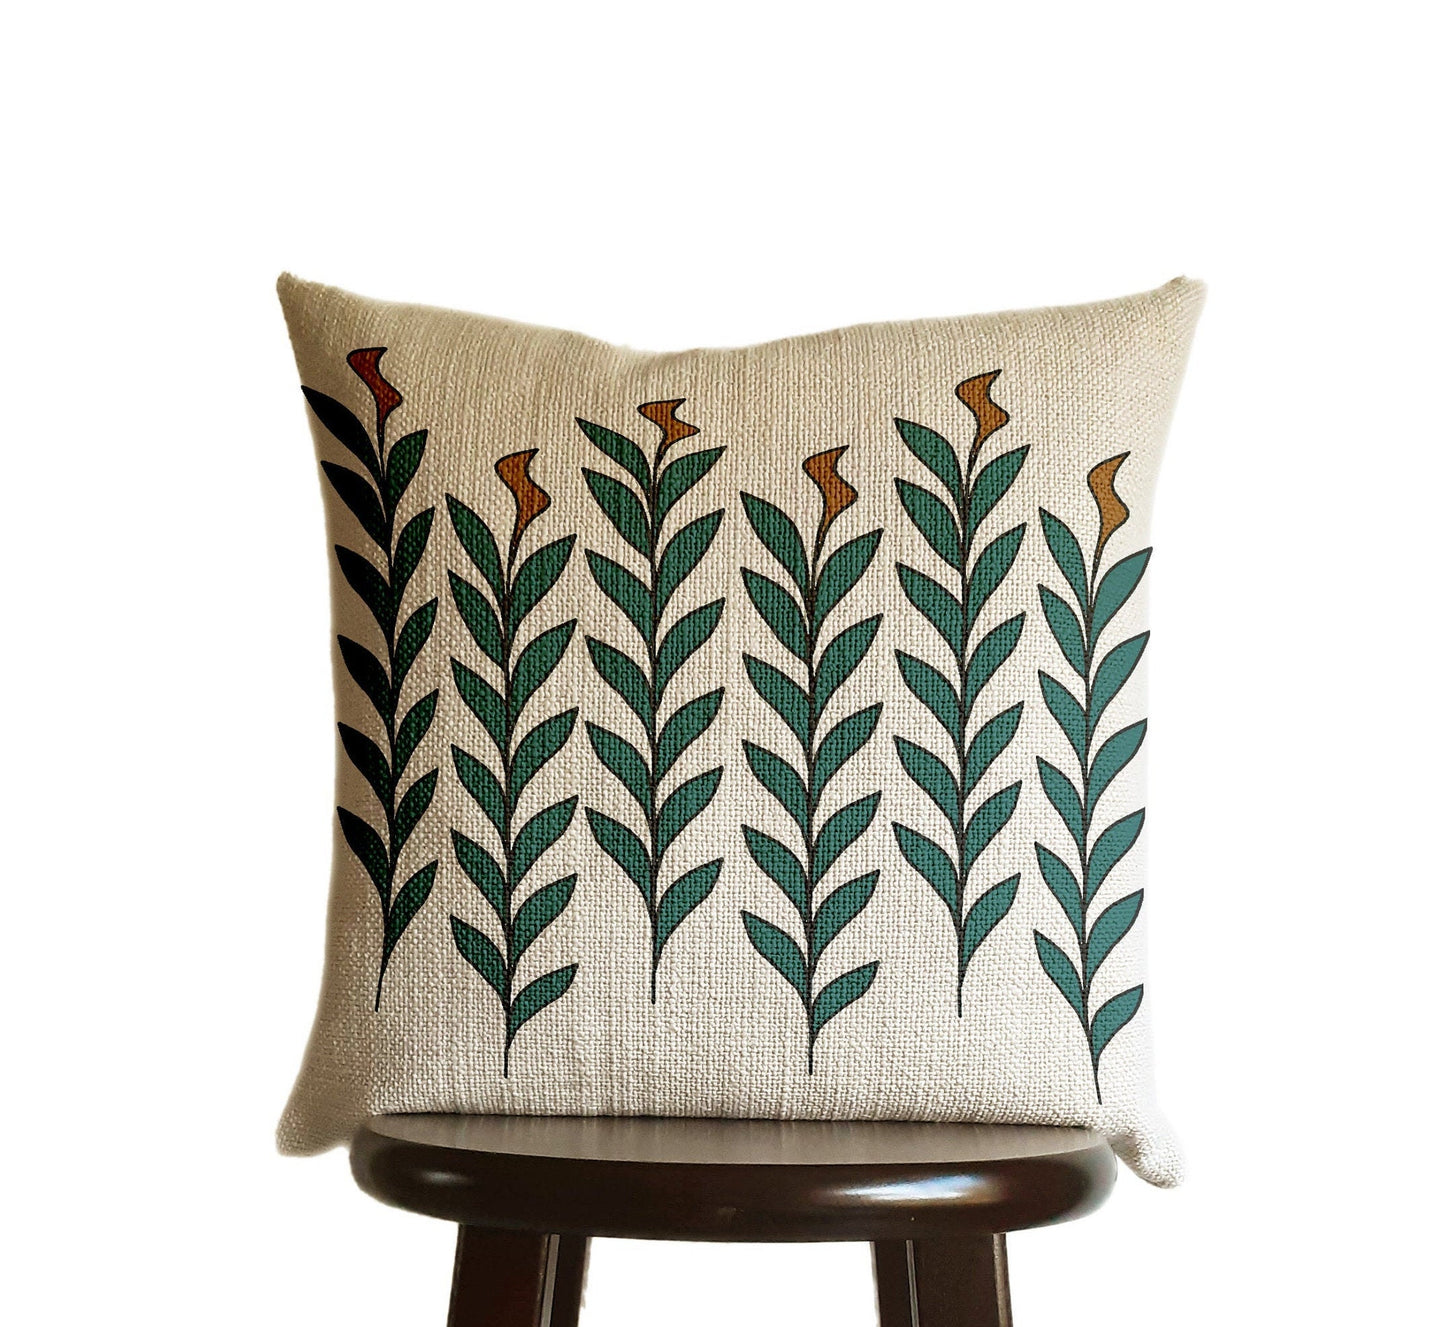 Leaves Pillow Cover Print Copper Bronze Brown Teal Blue Green, Natural Oatmeal Color Textured Woven Fabric in Modern Boho Home Decor - 18x18"